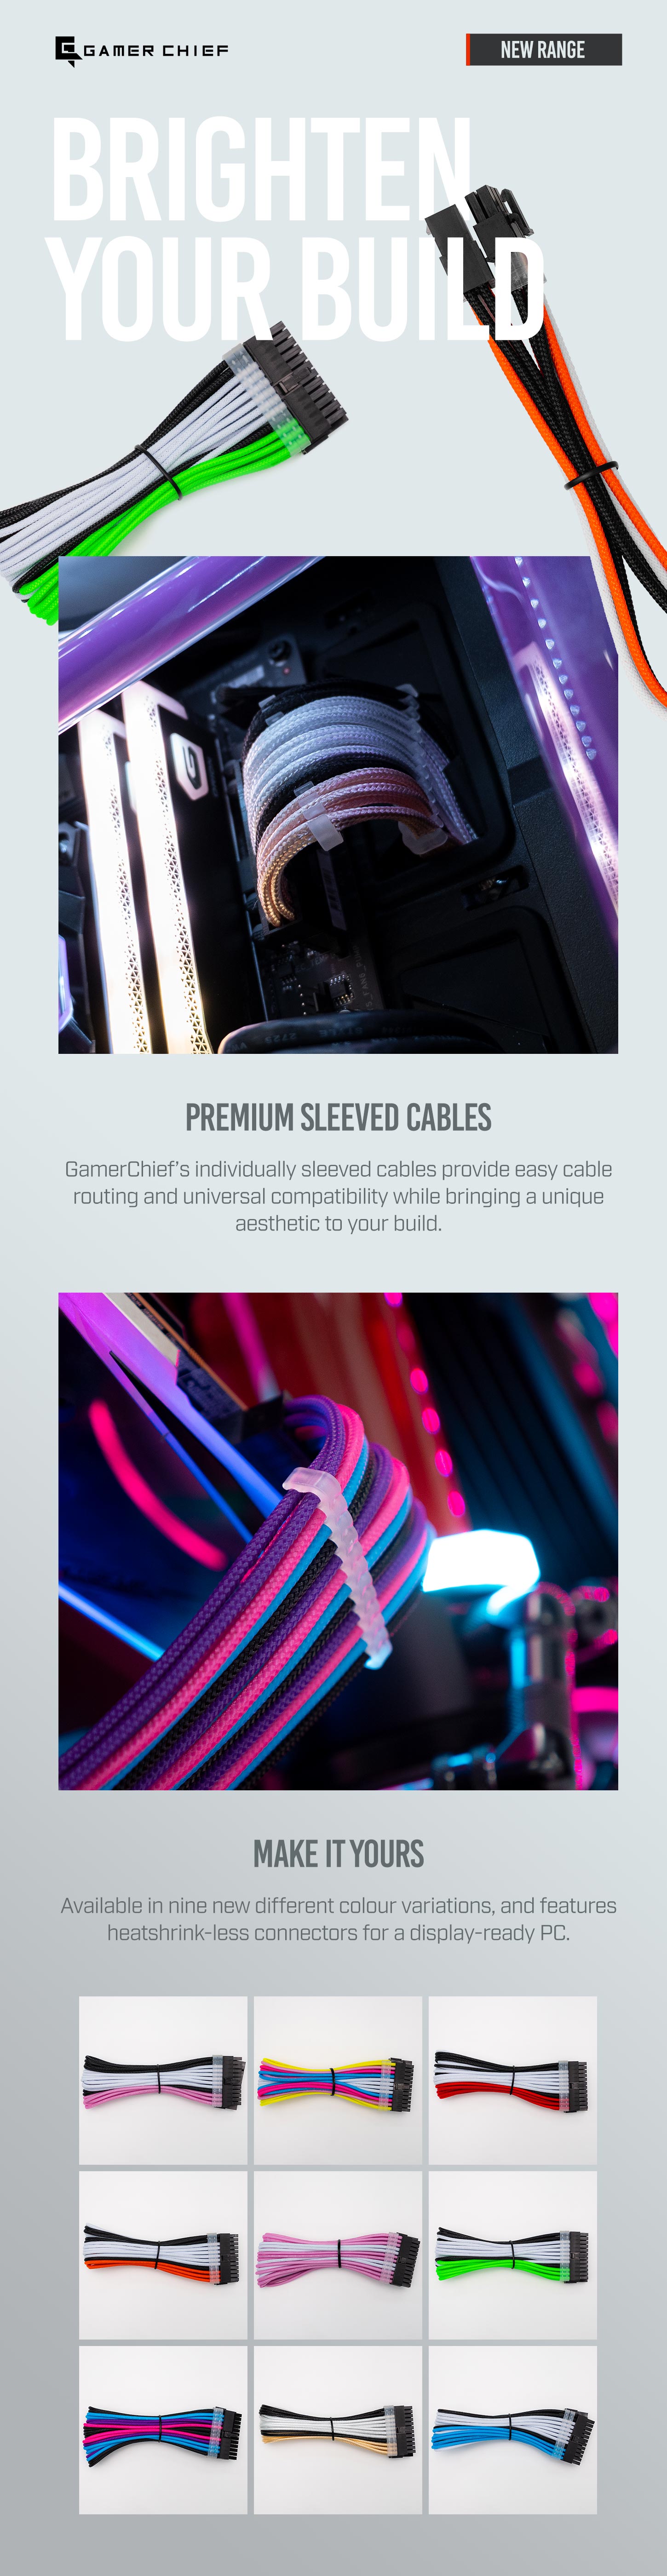 A large marketing image providing additional information about the product GamerChief Elite Series 24-Pin ATX 30cm Sleeved Extension Cable (Orange/White/Black) - Additional alt info not provided